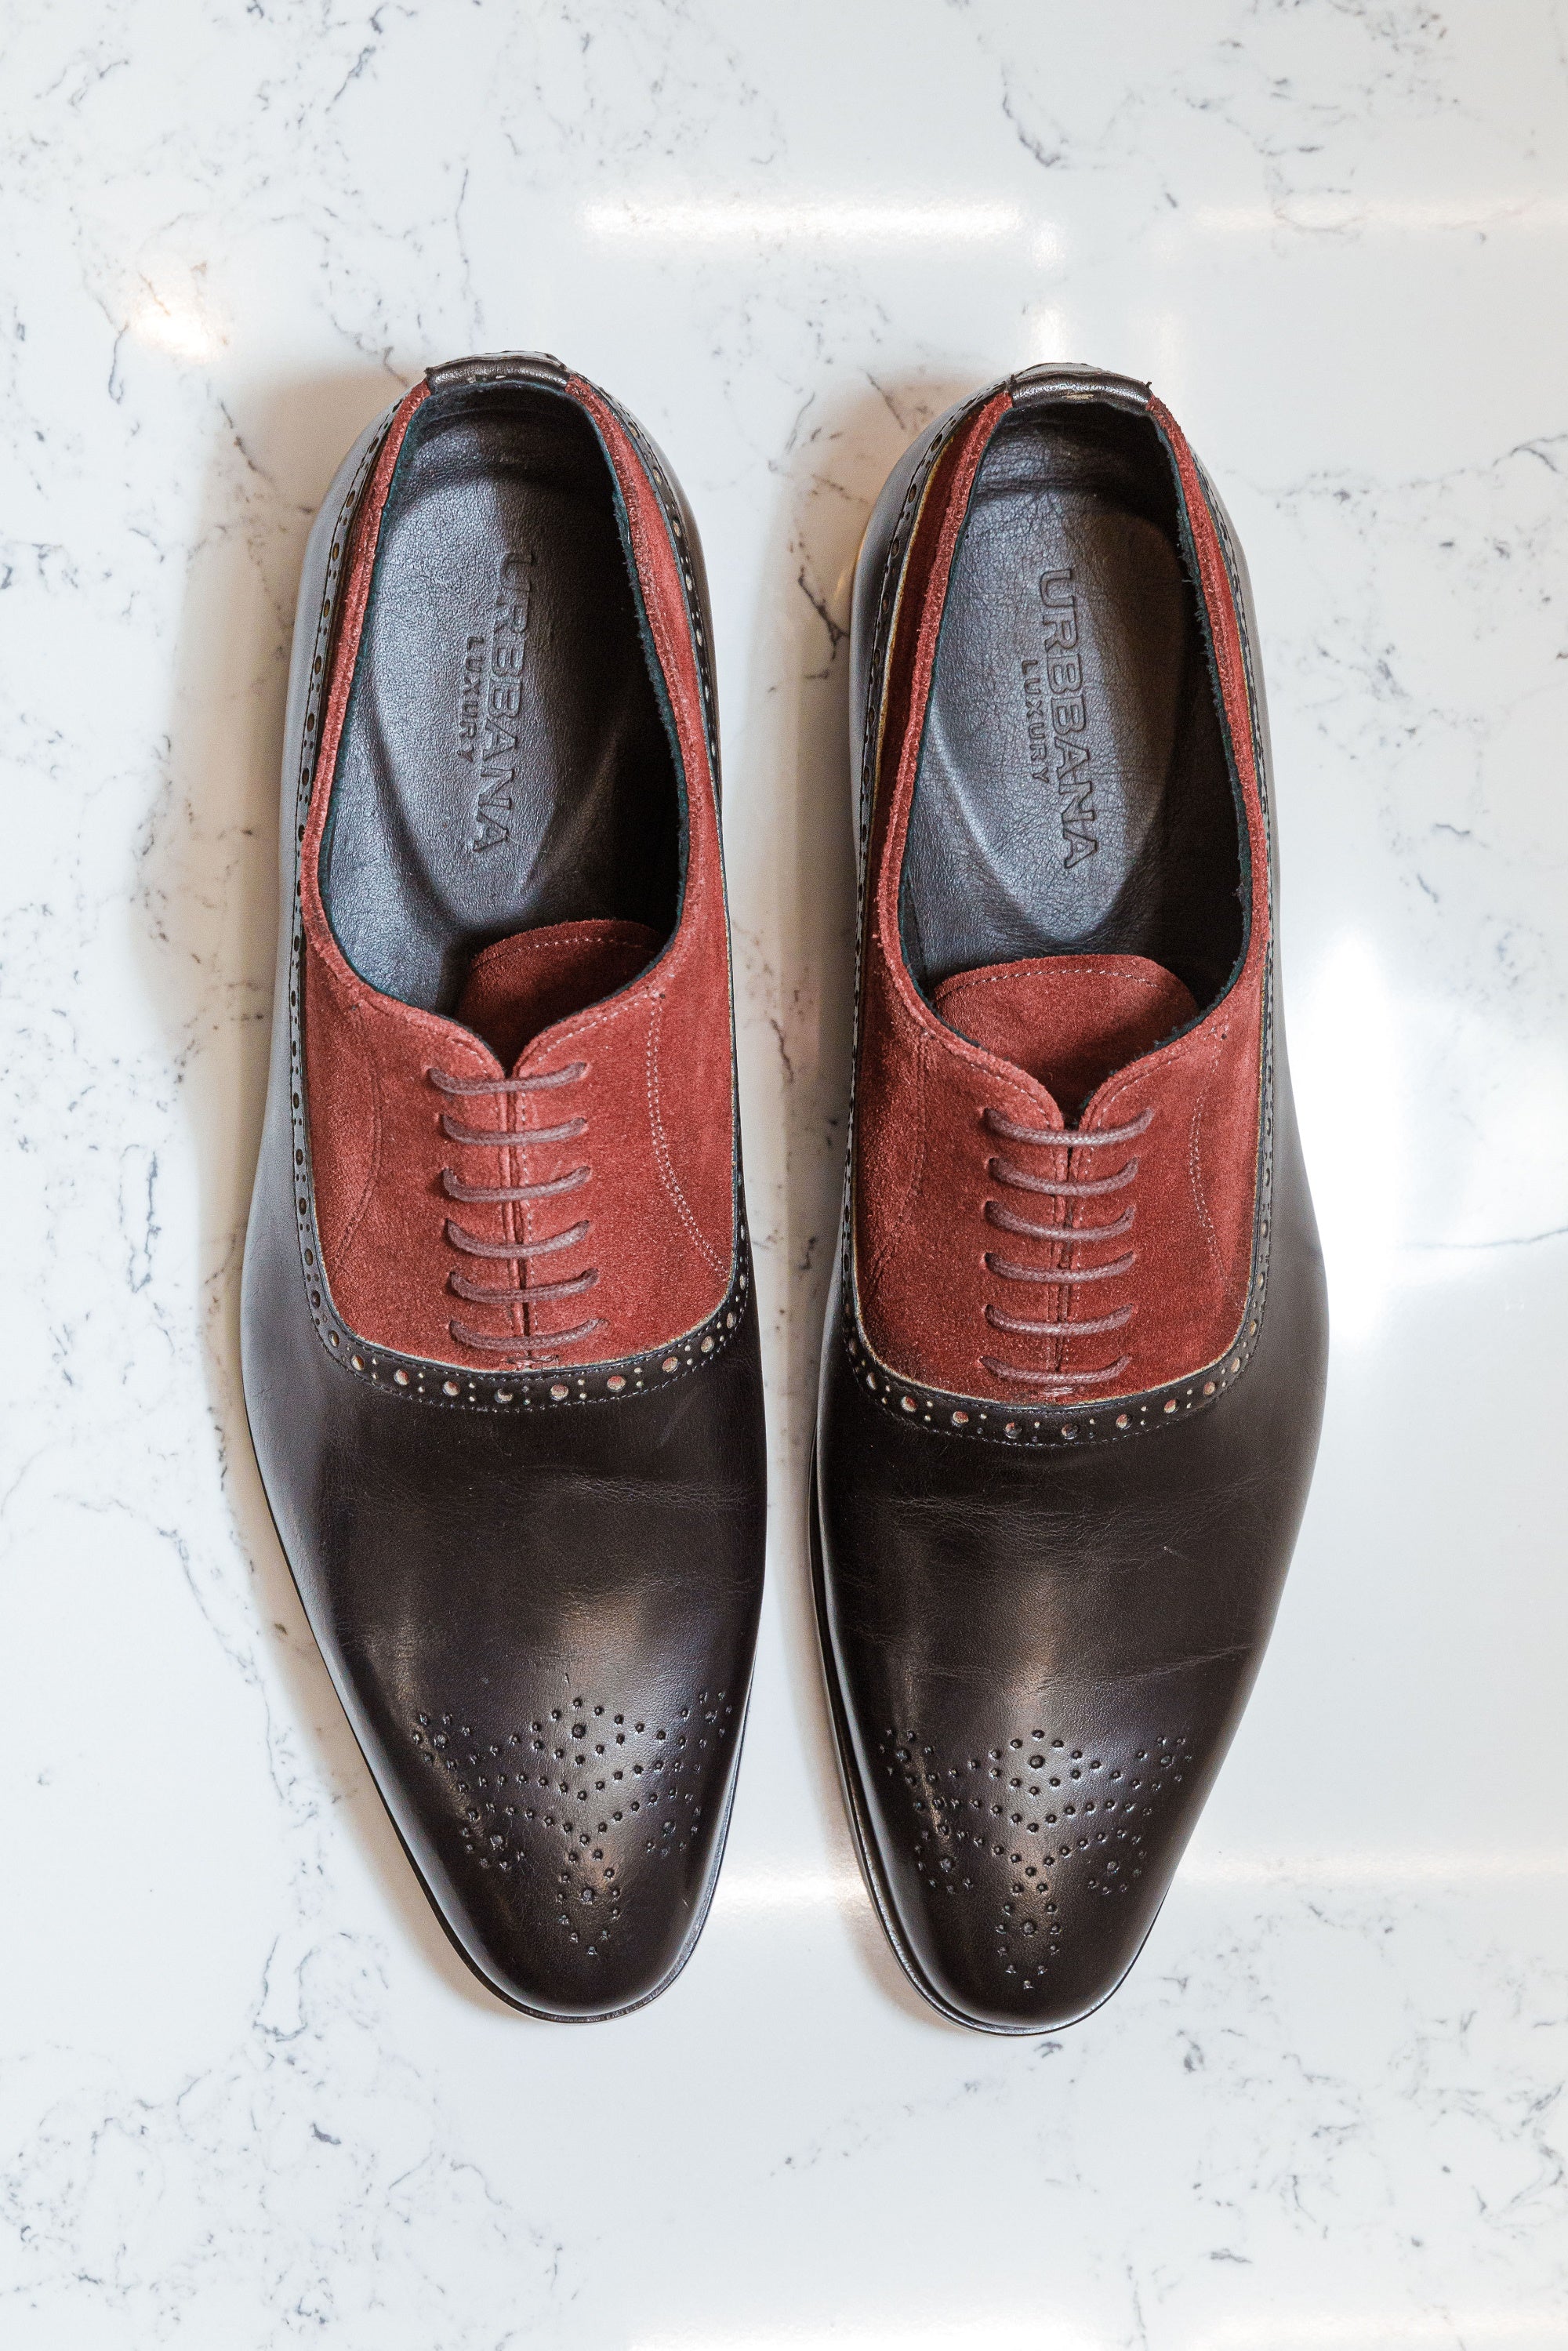 Fuente Shoes - Black/Red - Shoes by Urbbana